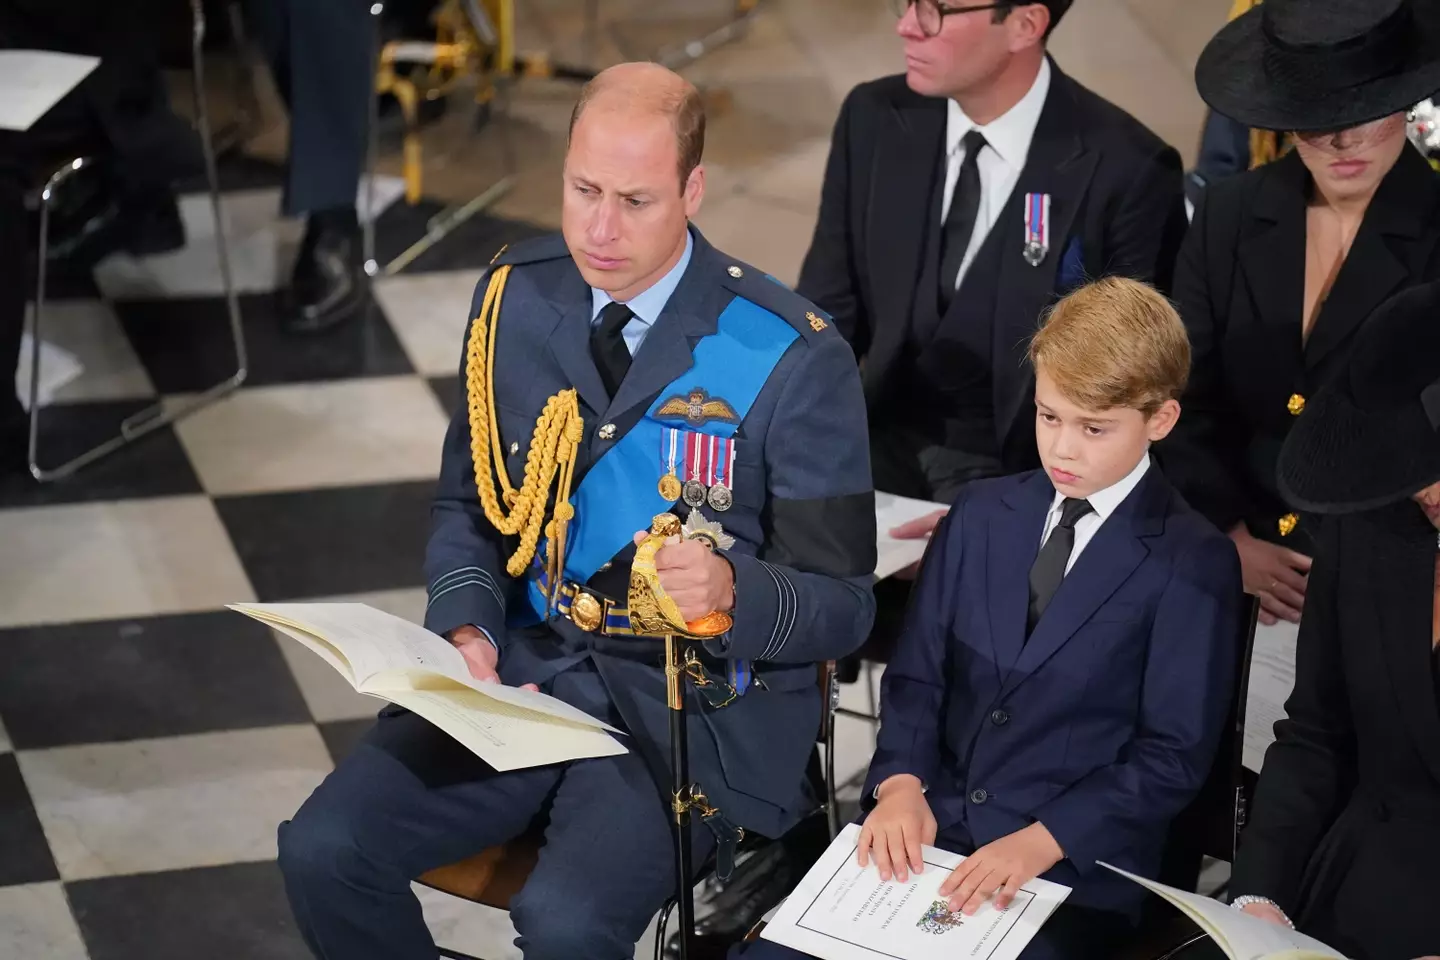 Prince George got a little bit emotional during the ceremony.